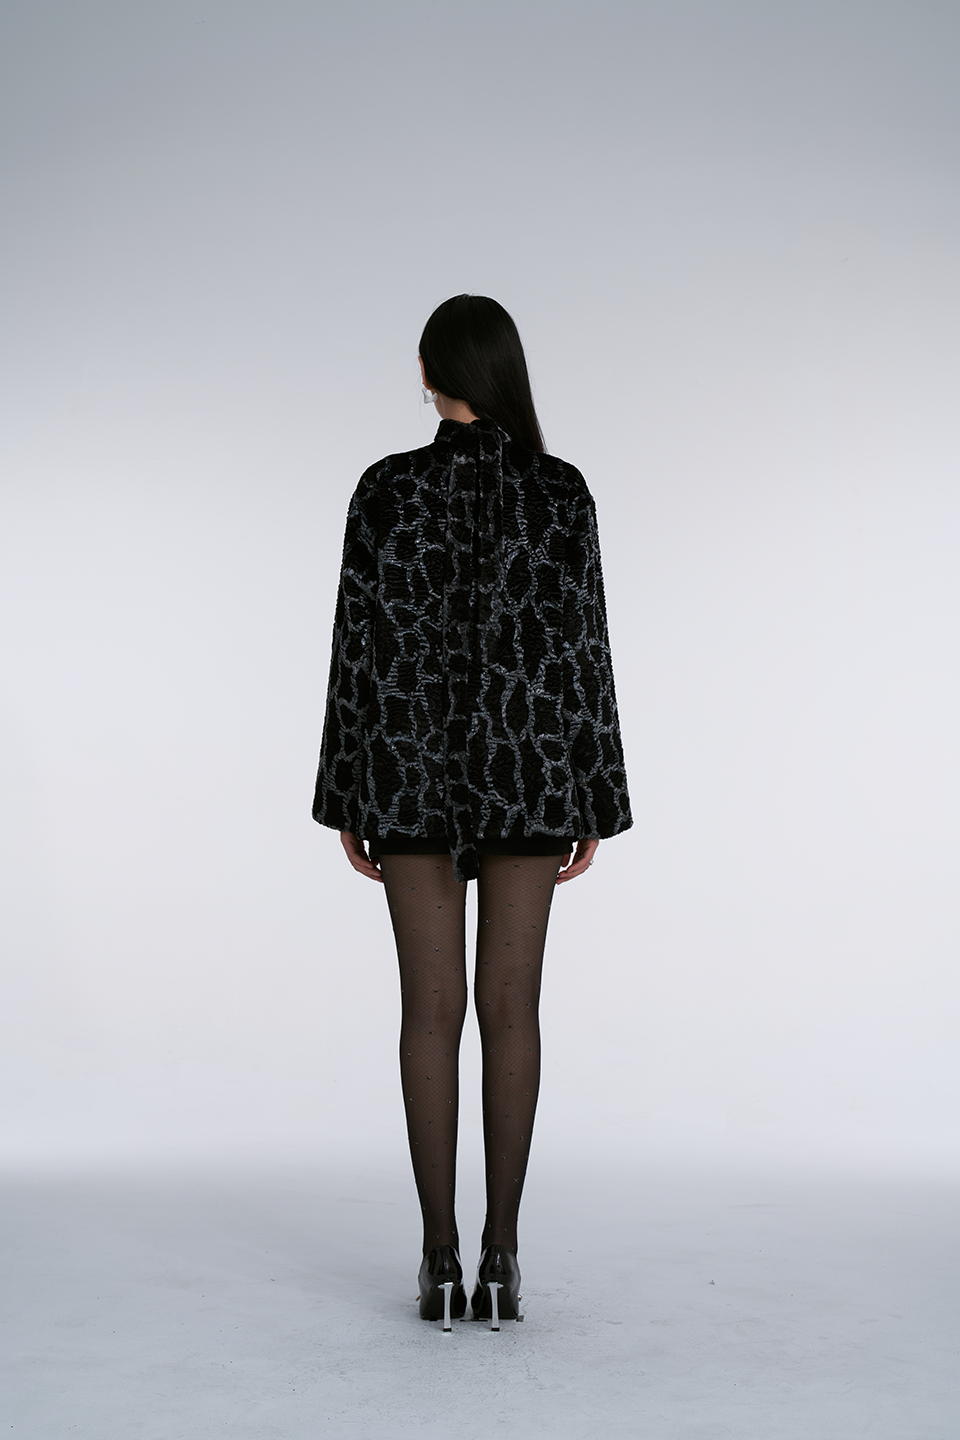 Black Acetate Patterned Outerwear